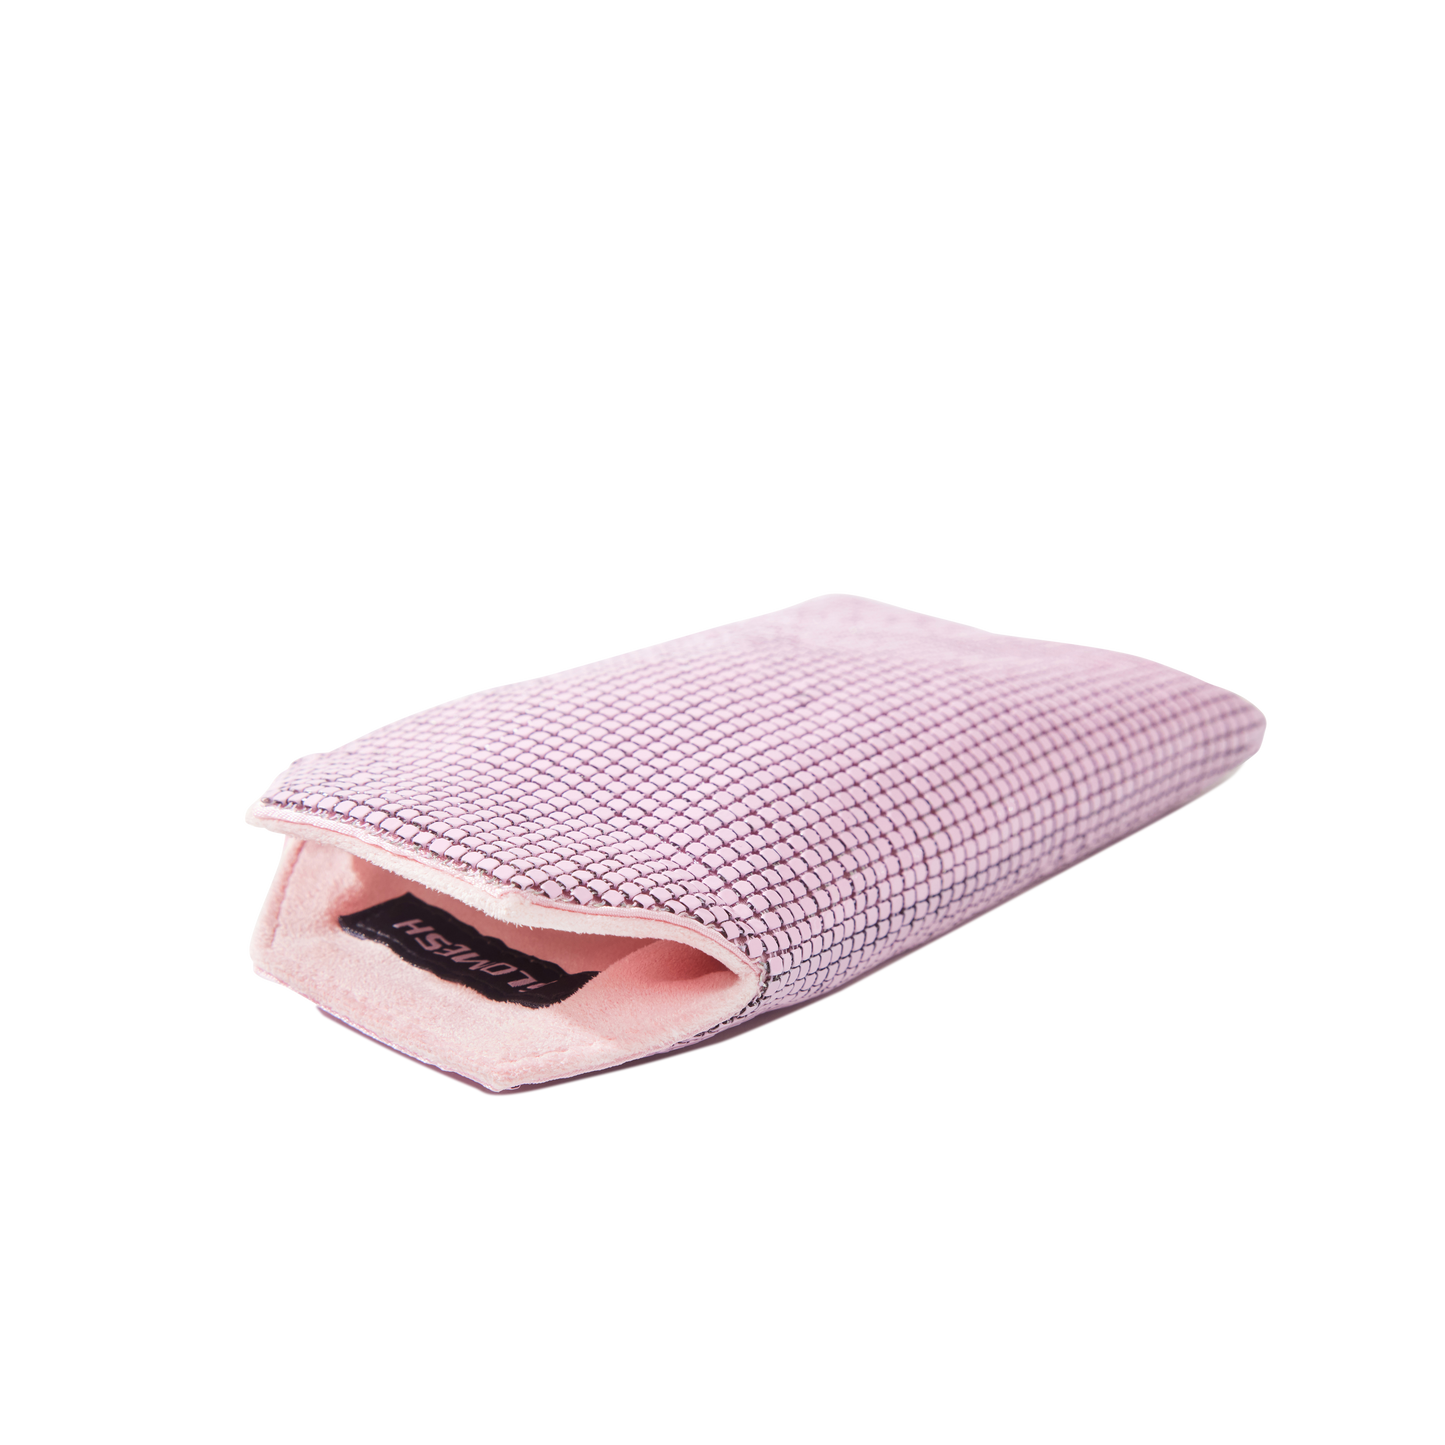 SUNSPEC GLAM CASE - RE-ISSUE ITEM No. #78 - Baby Pink / Baby Pink Faux Suede Lining